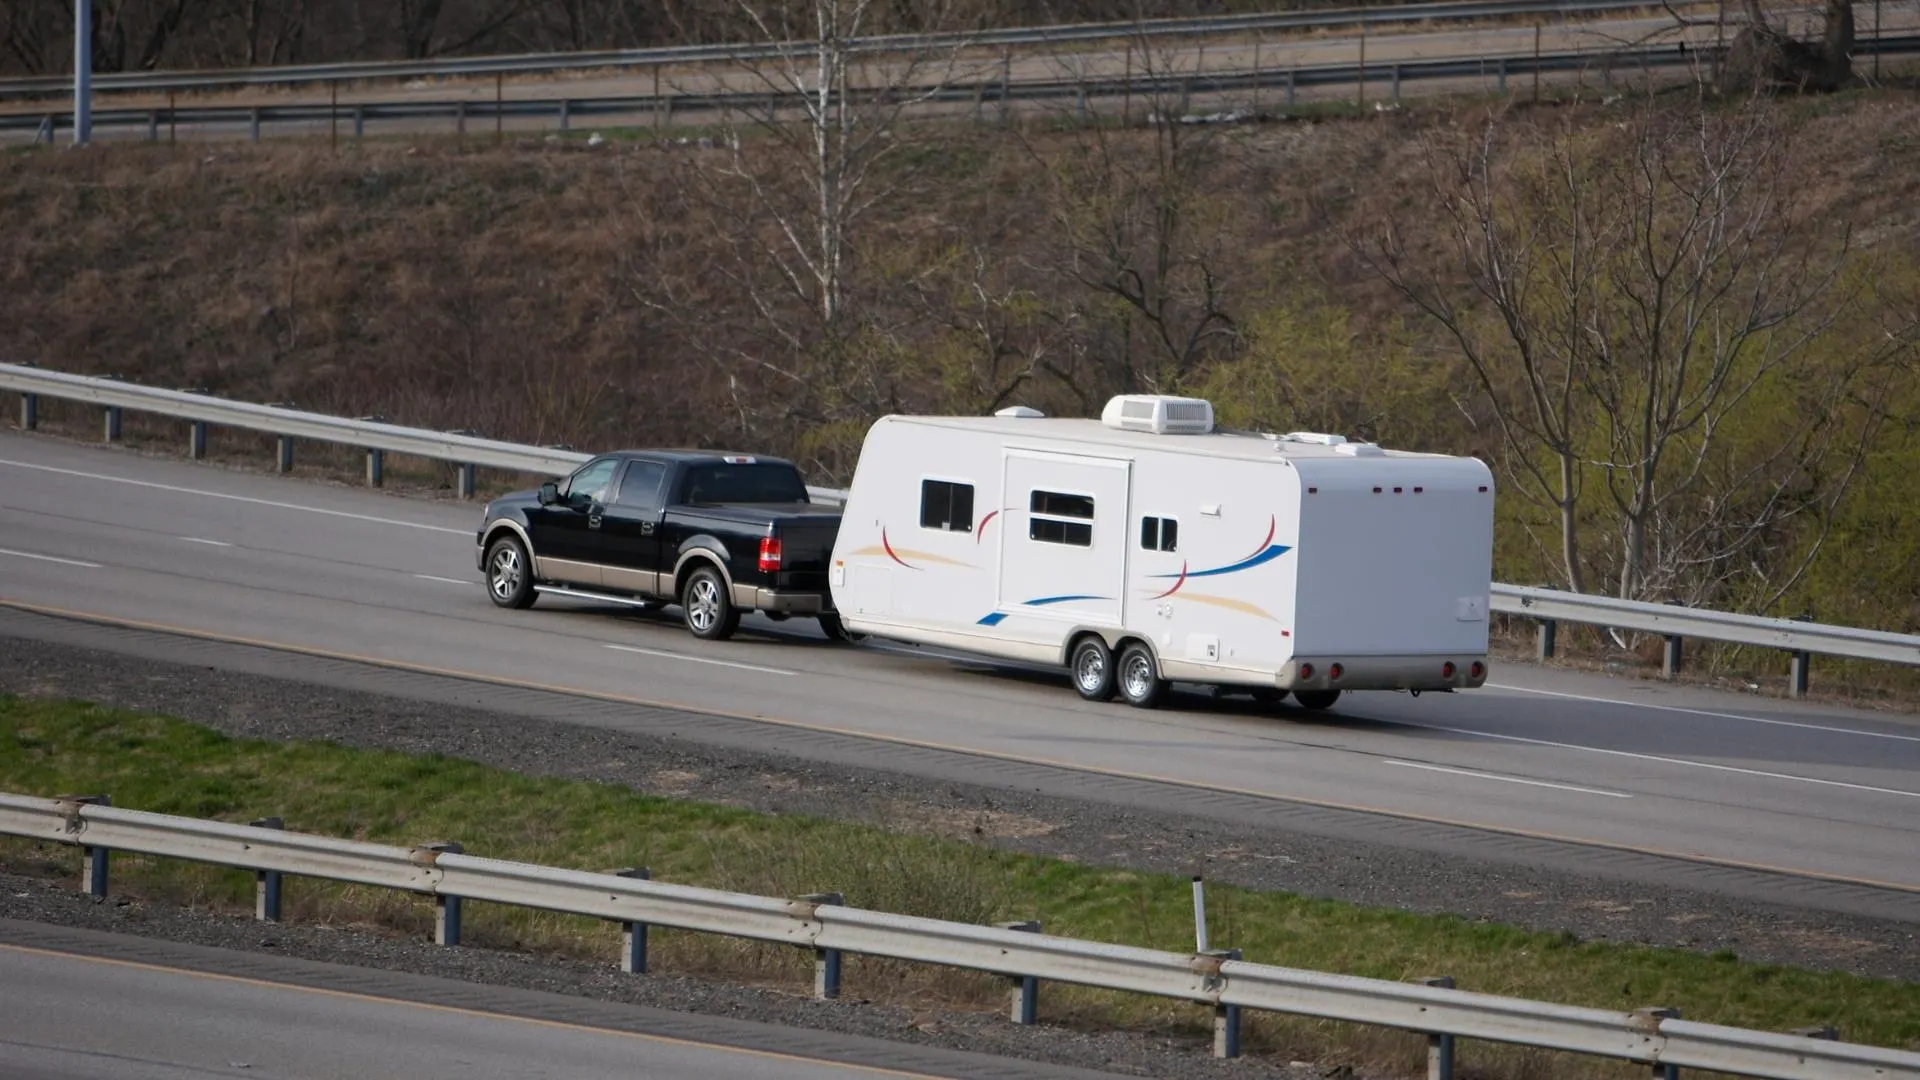 Truck towing travel trailer - what does RV insurance cover?